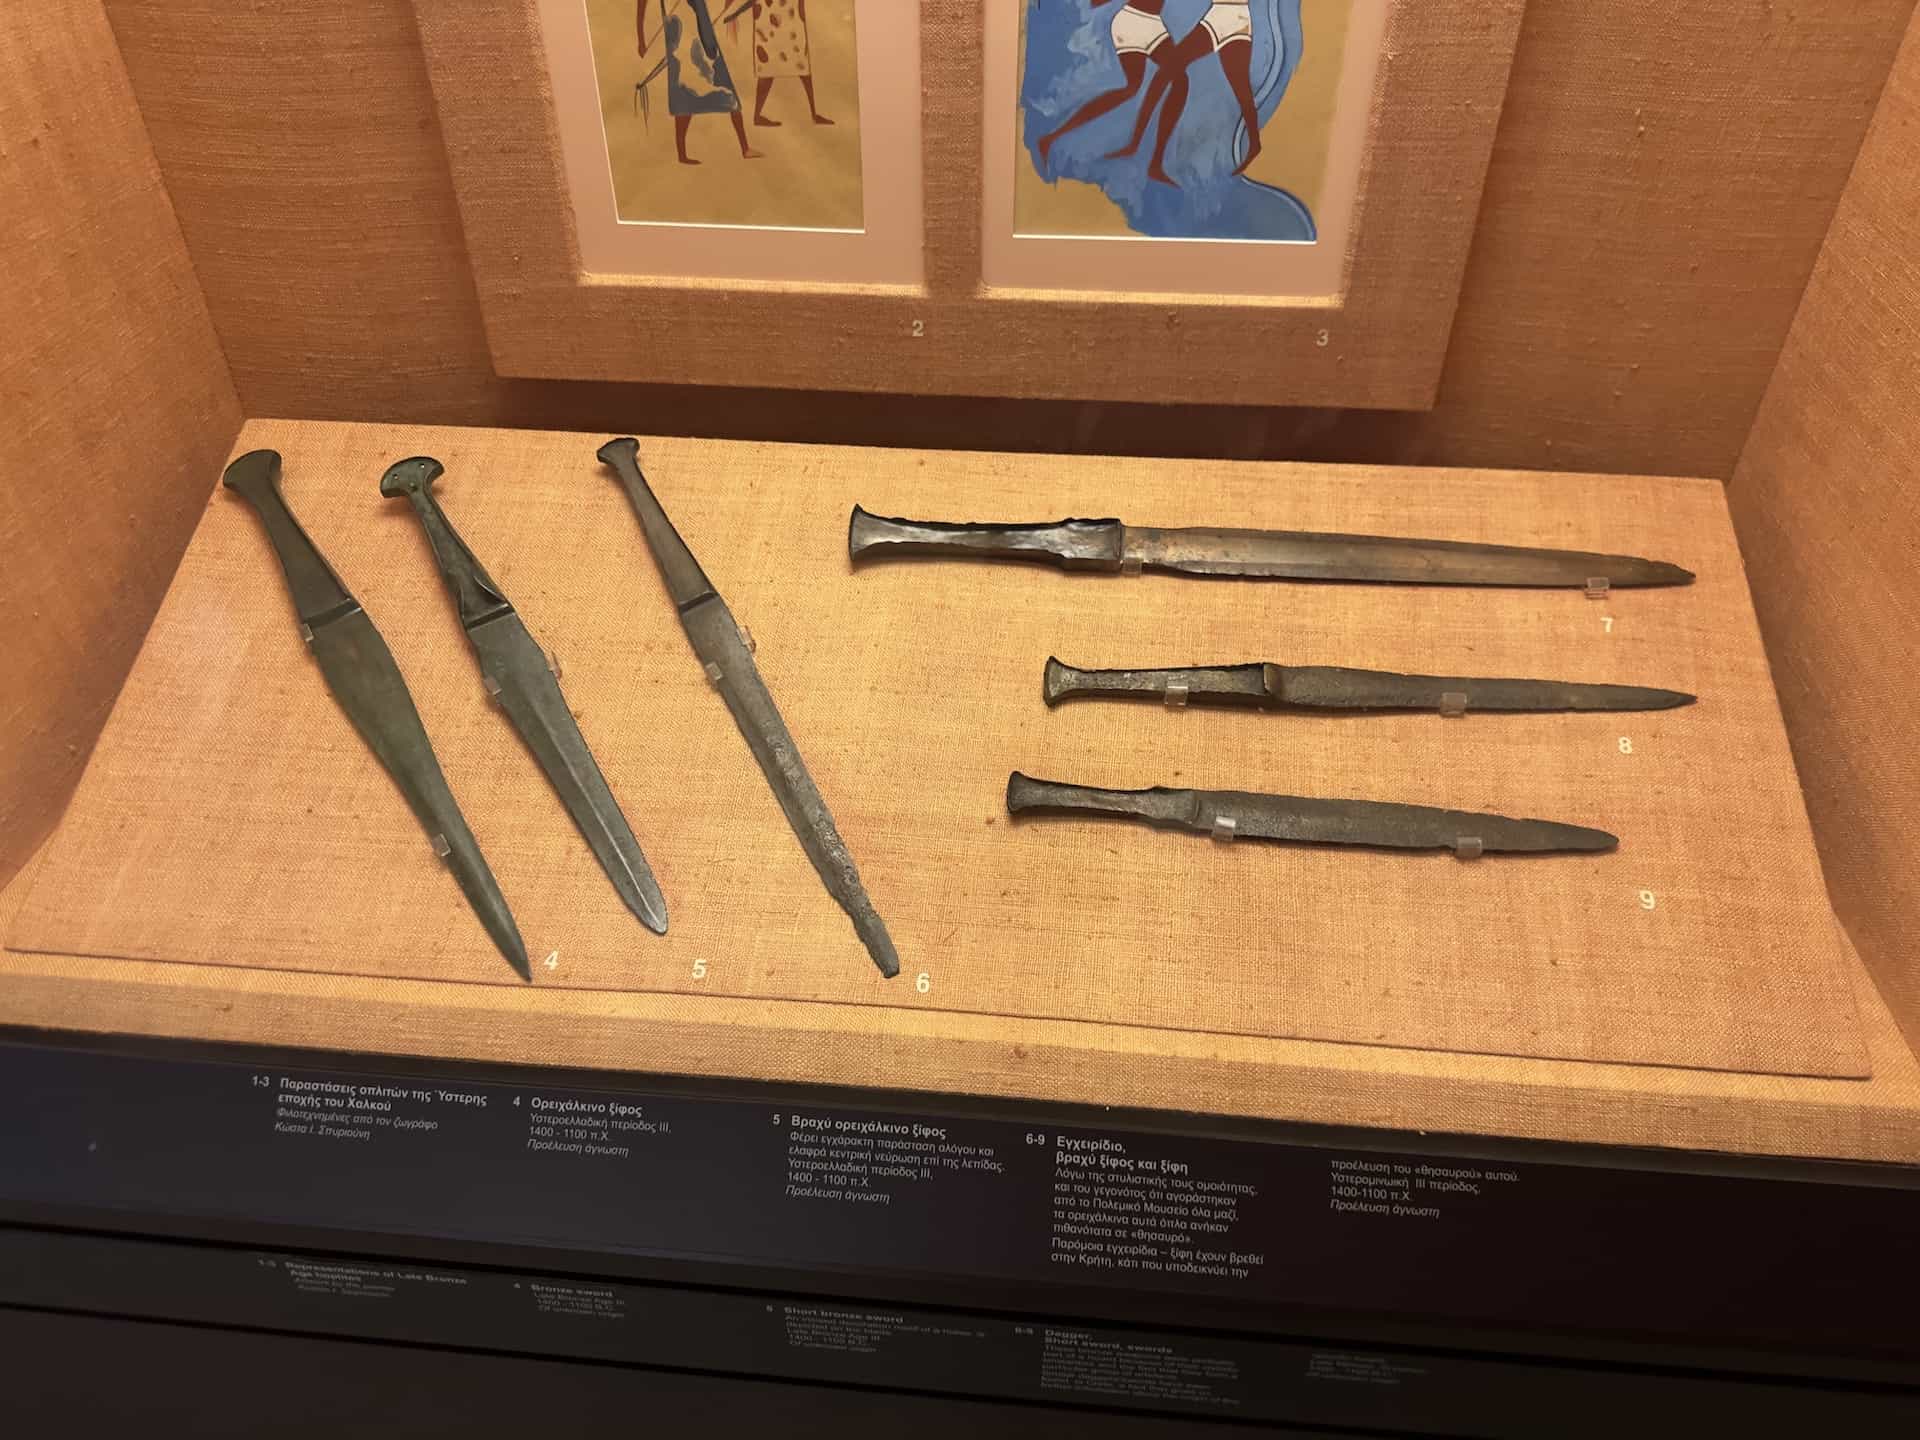 Bronze swords and daggers, Late Bronze Age III, 1400-1100 BC at the War Museum in Athens, Greece